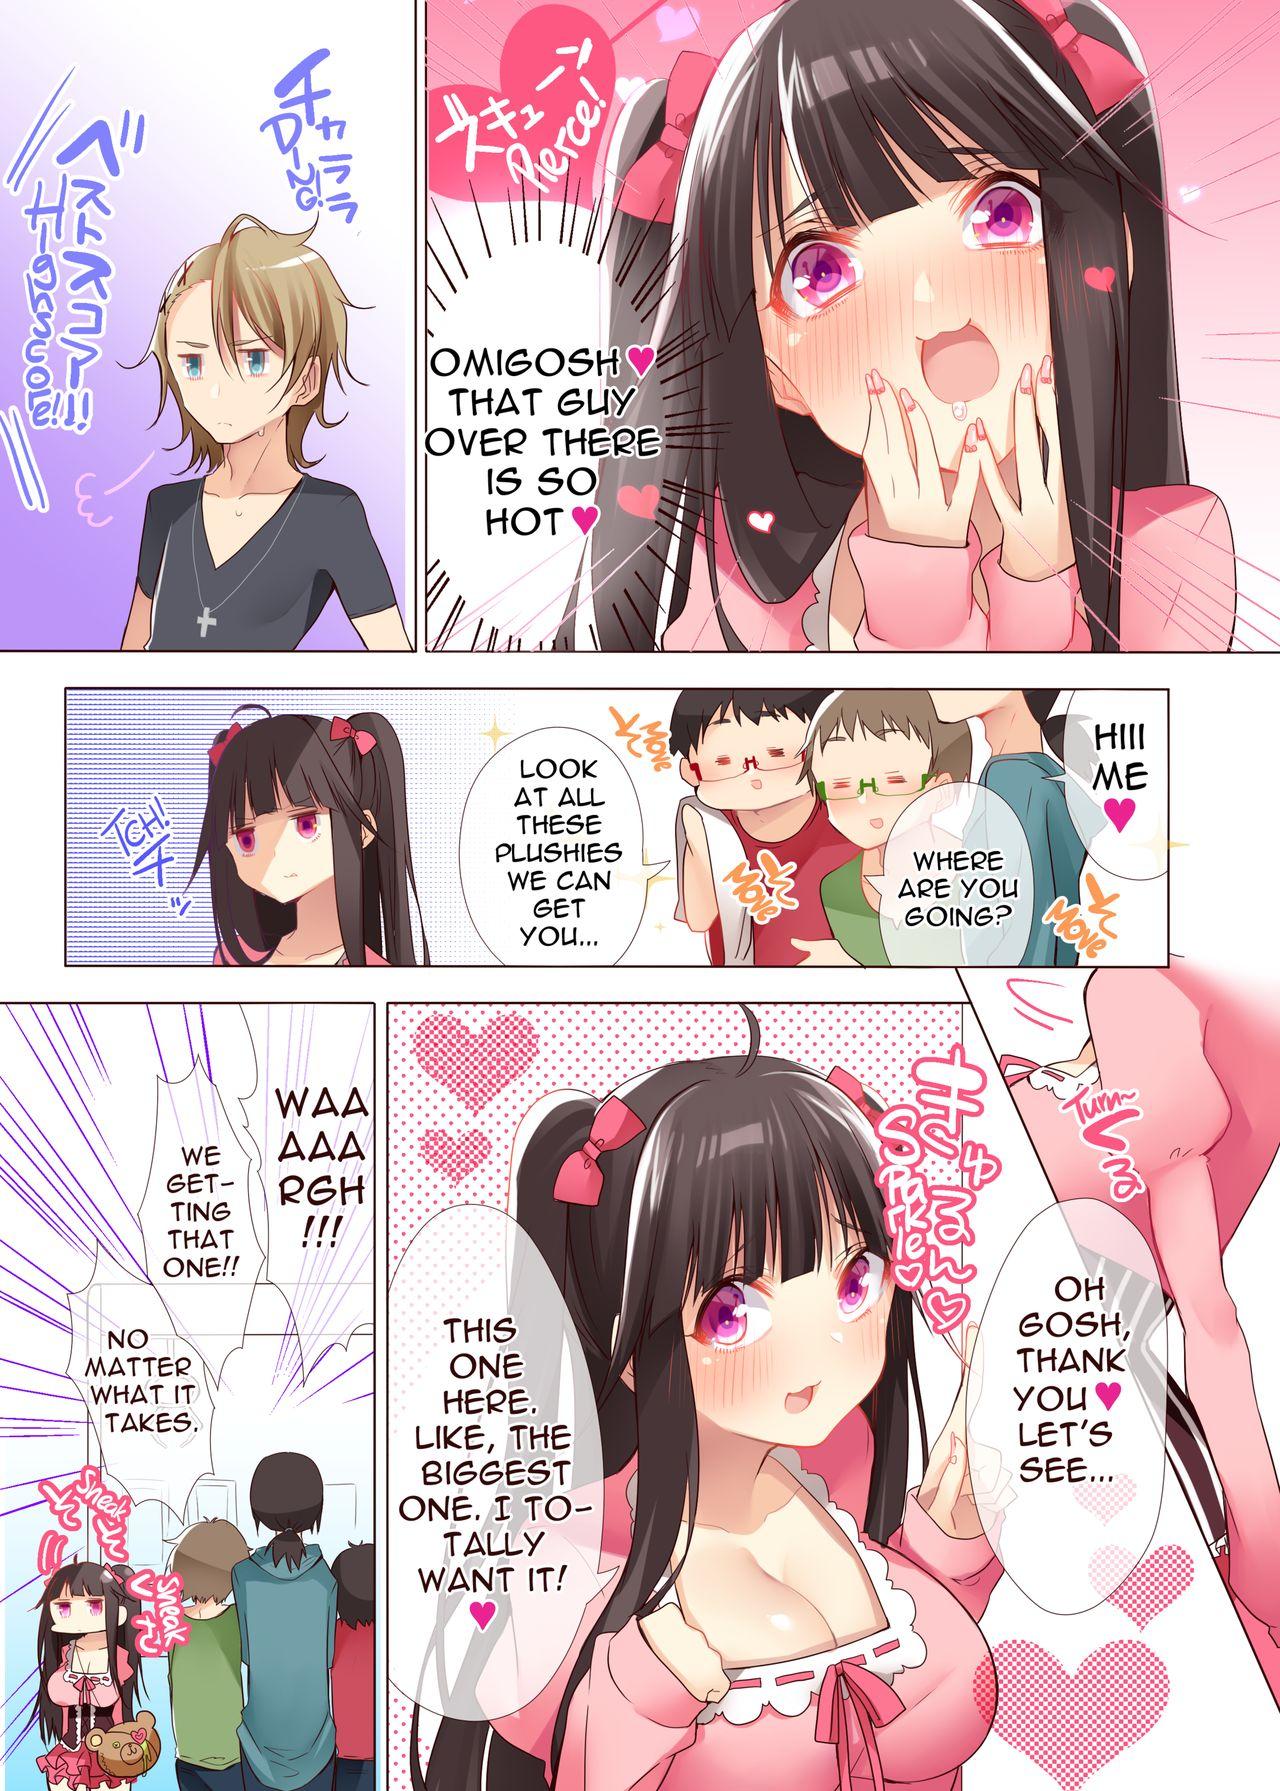 Gay Latino The Princess of an Otaku Group Got Knocked Up by Some Piece of Trash So She Let an Otaku Guy Do Her Too!? - Original Forbidden - Page 4